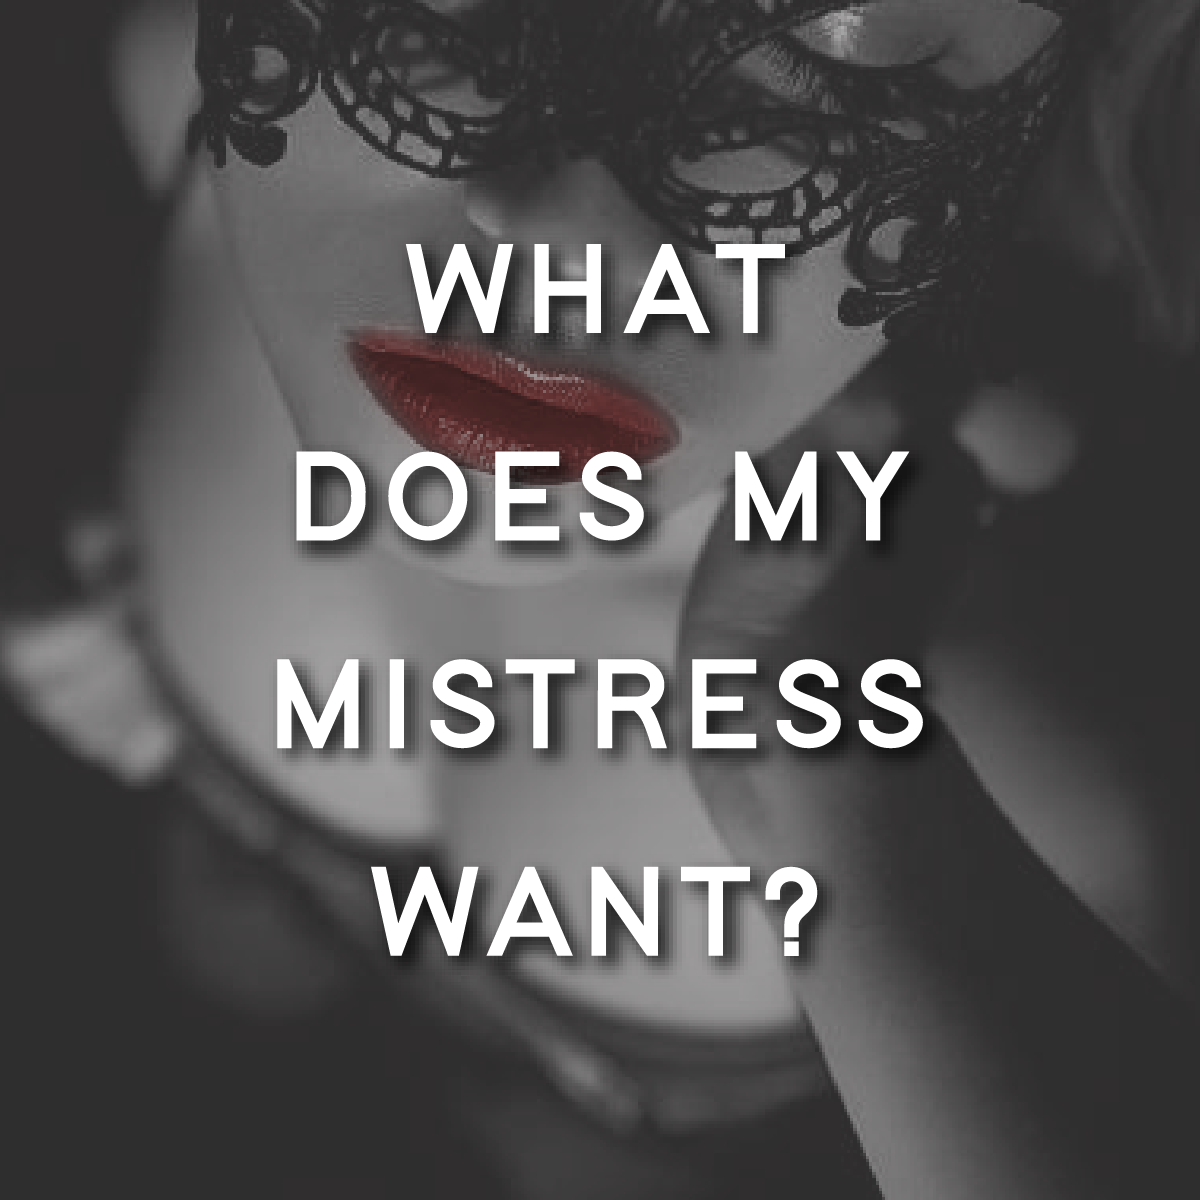 What Does My Mistress Want?